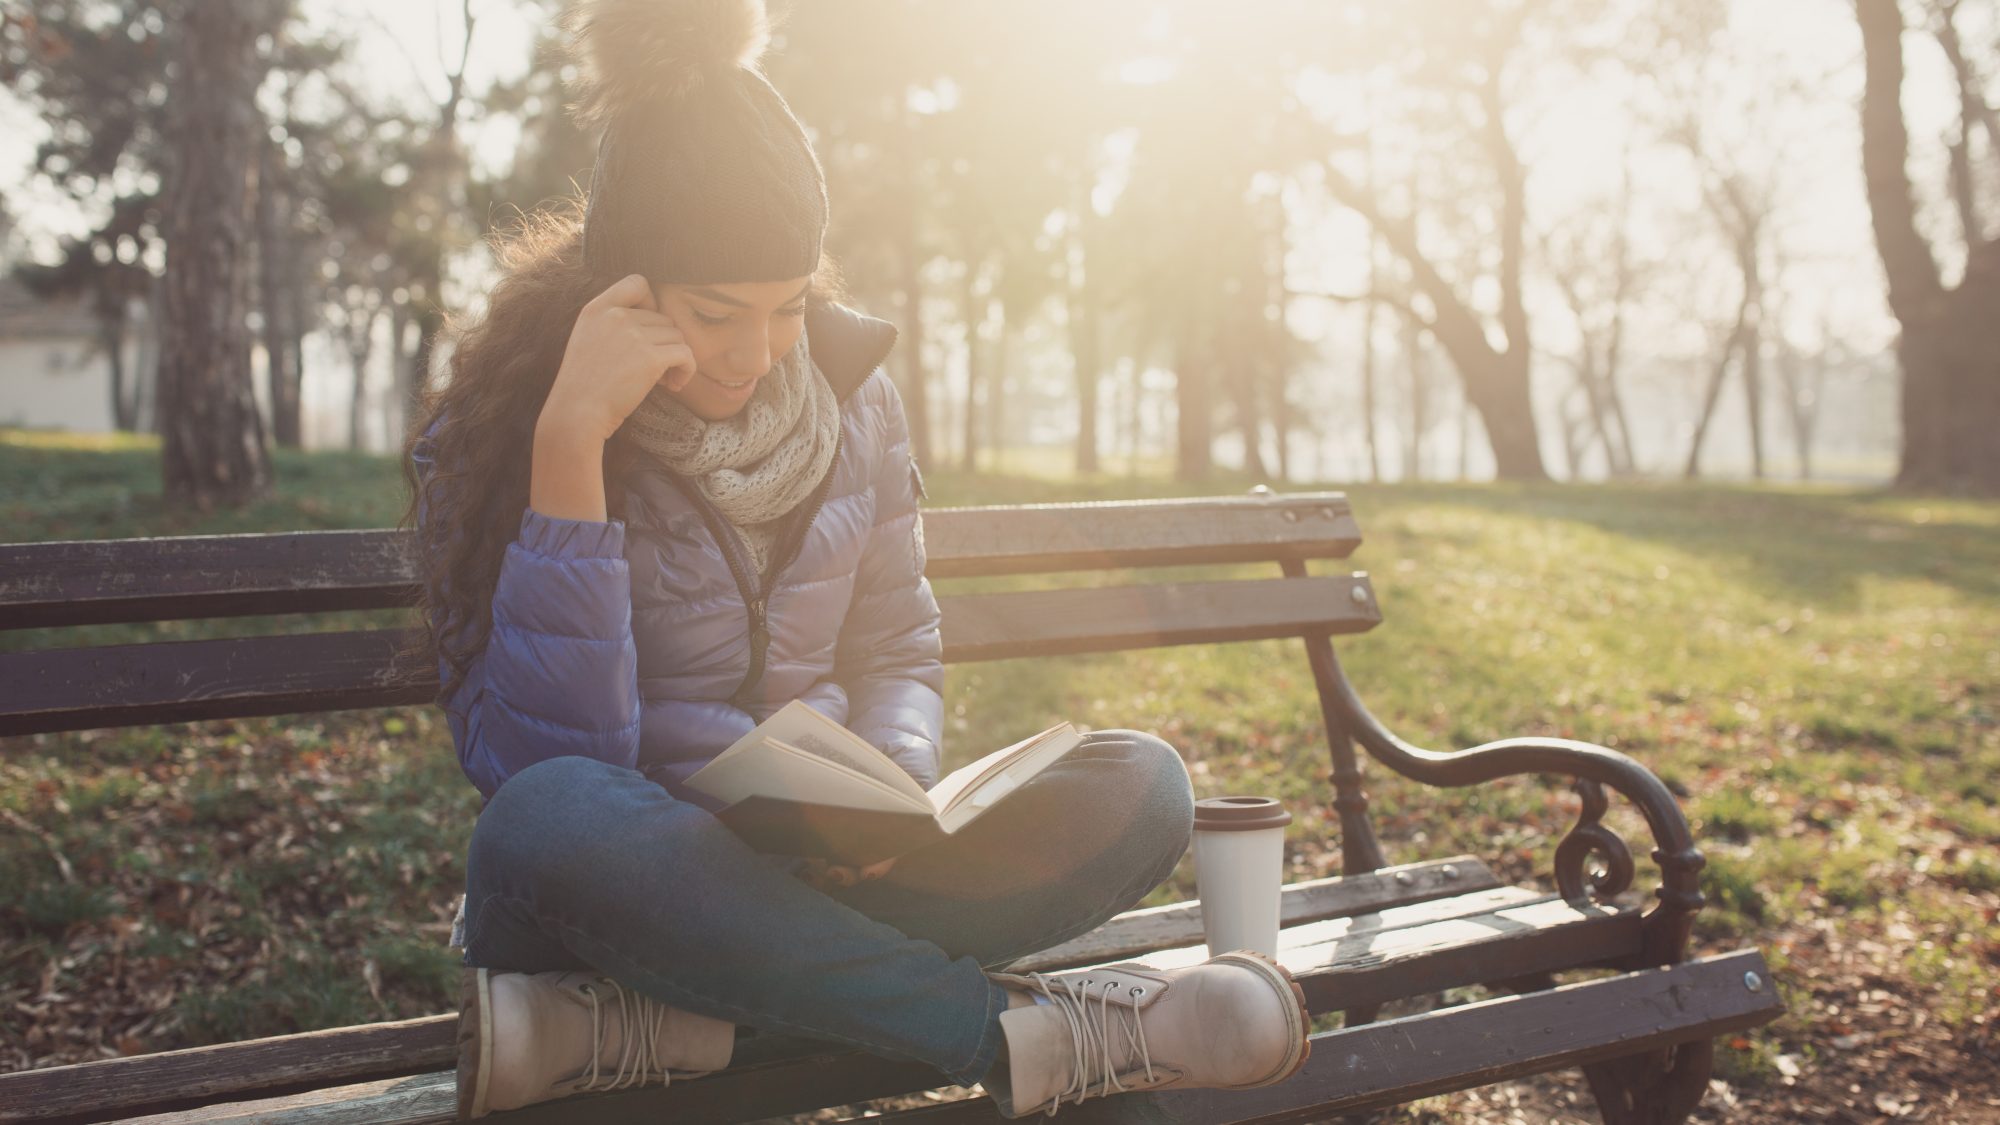 A young woman sits on a park bench cross-legged reading a book. She is wearing a pompom hat, a purple winter jacket and jeans. Next to her on the bench is a coffee cup.